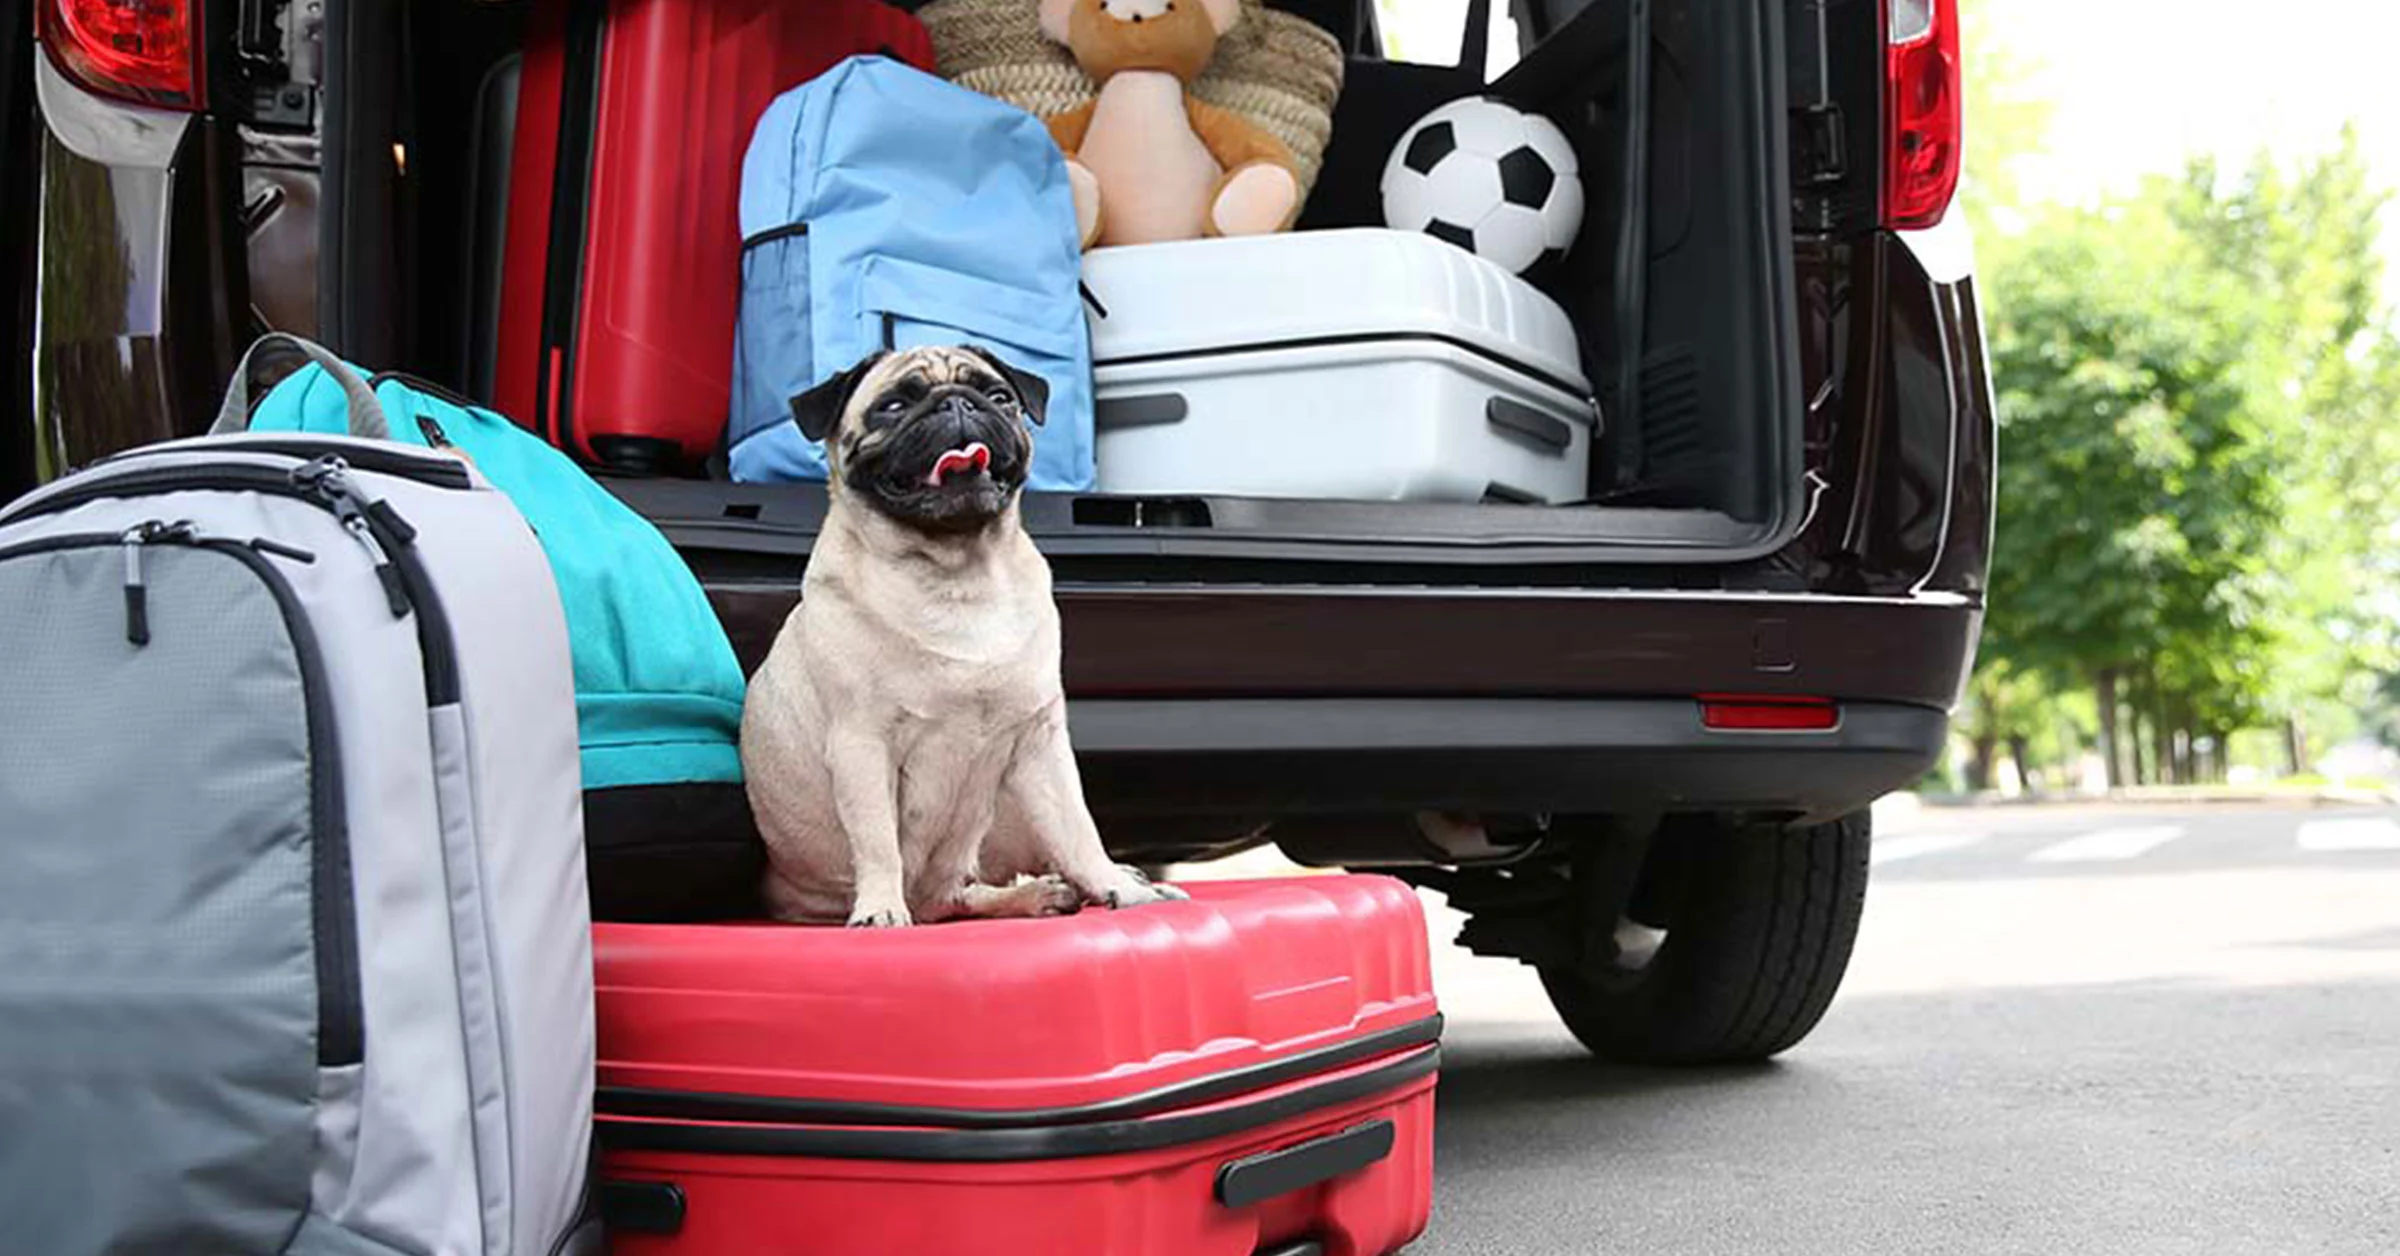 dog sitting on luggage on ground in front of care with luggage in back